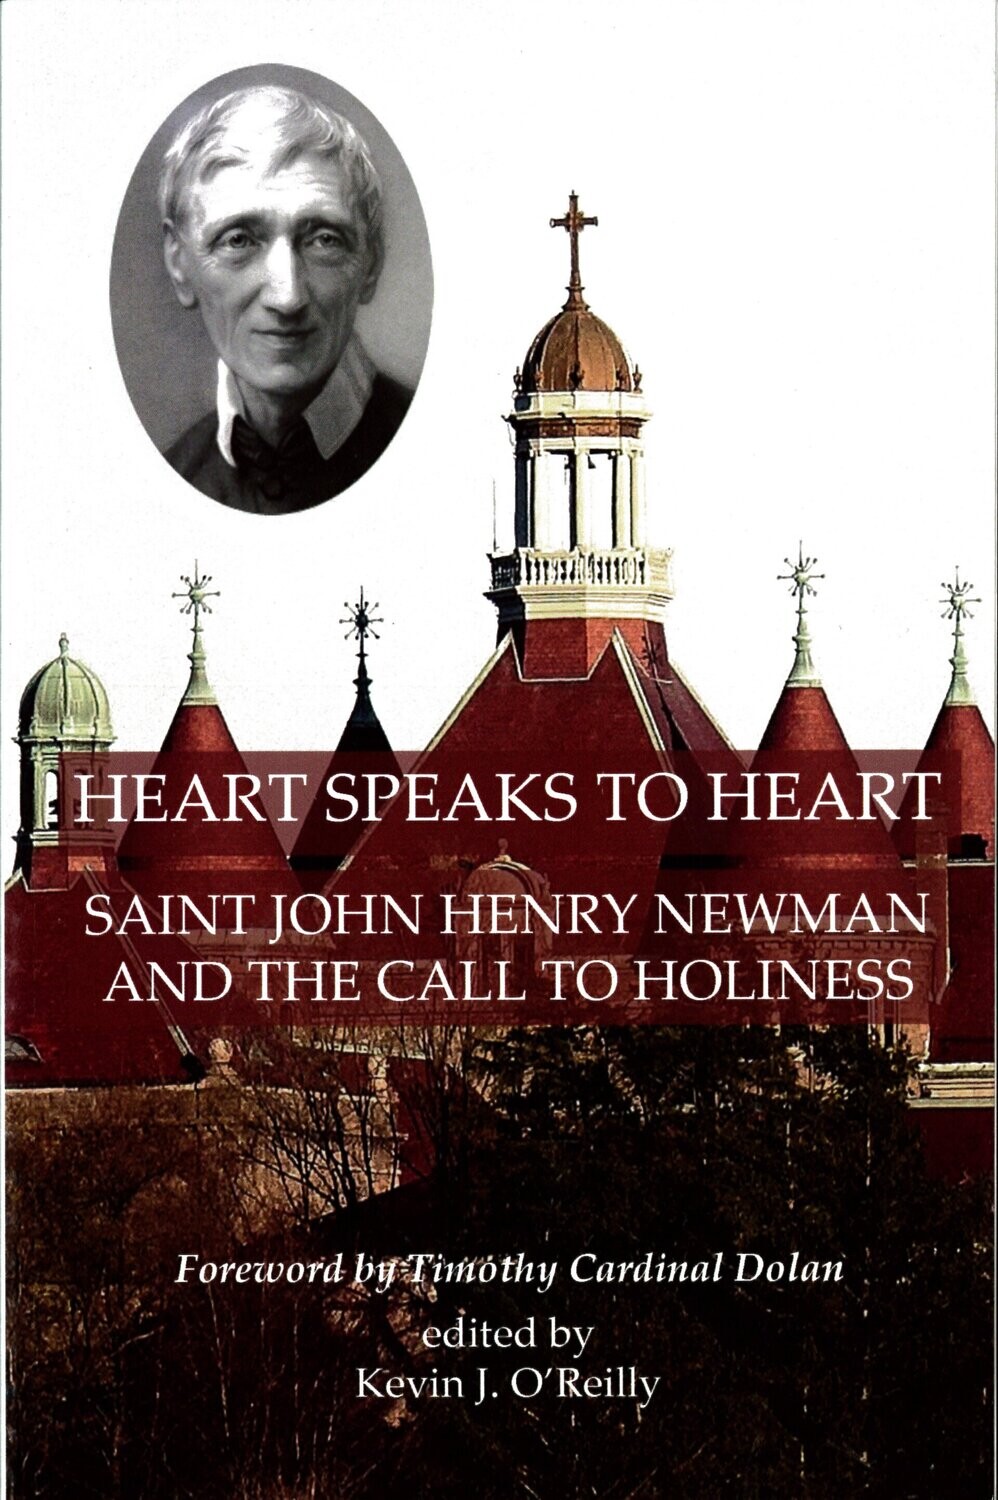 Heart Speaks to Heart: Saint John Henry Newman and the Call to Holiness